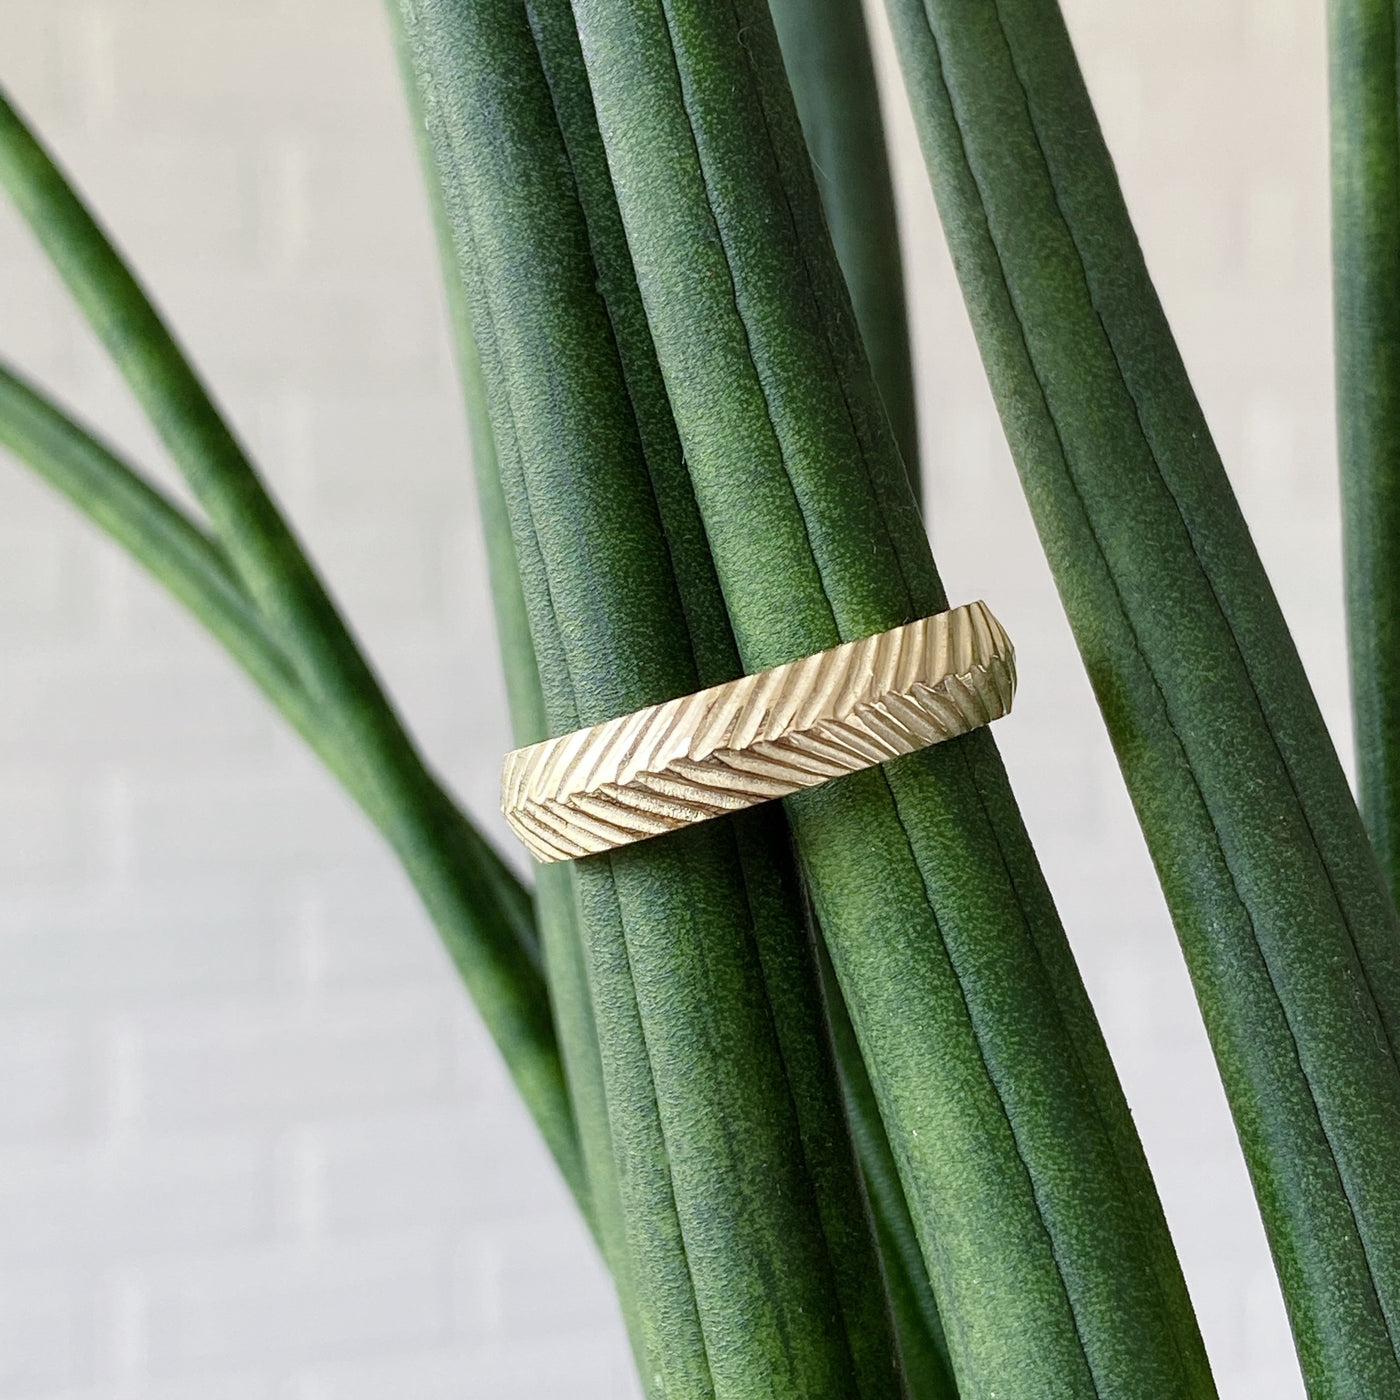 Herringbone yellow gold carved wedding band in natural light. 